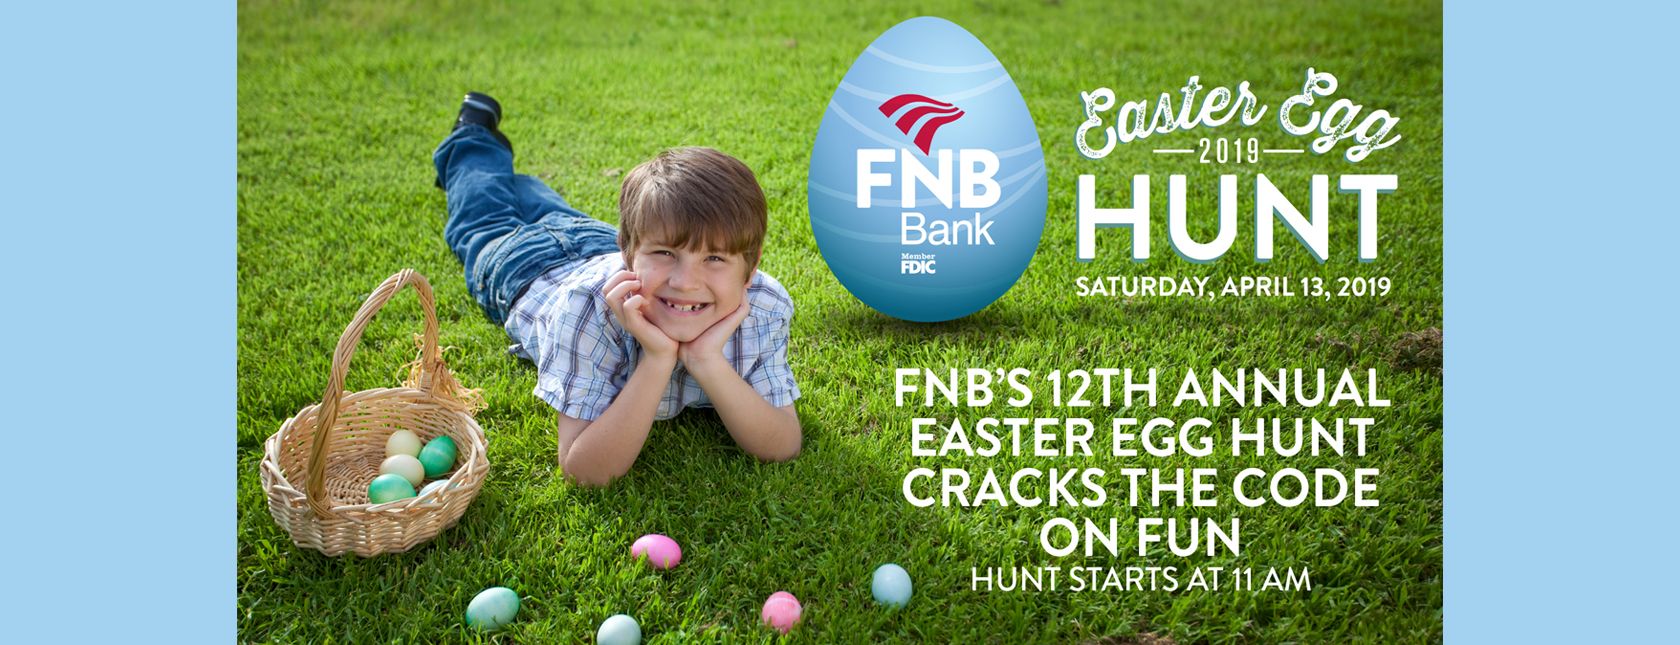 FNB's 12th Annual Easter Egg Hunt is Saturday, April 13